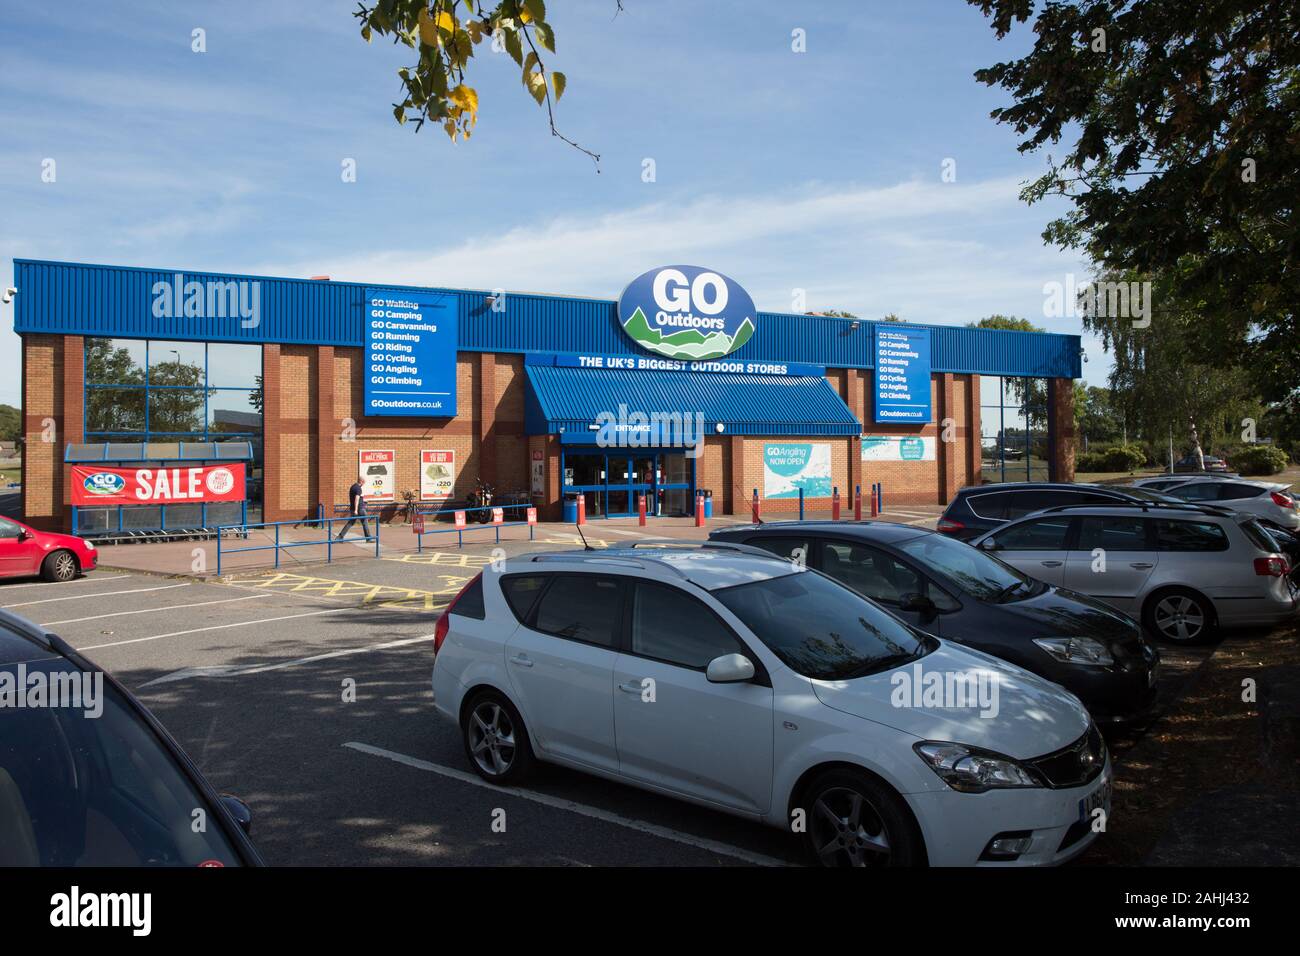 Go Outdoors store, Bedford Stock Photo